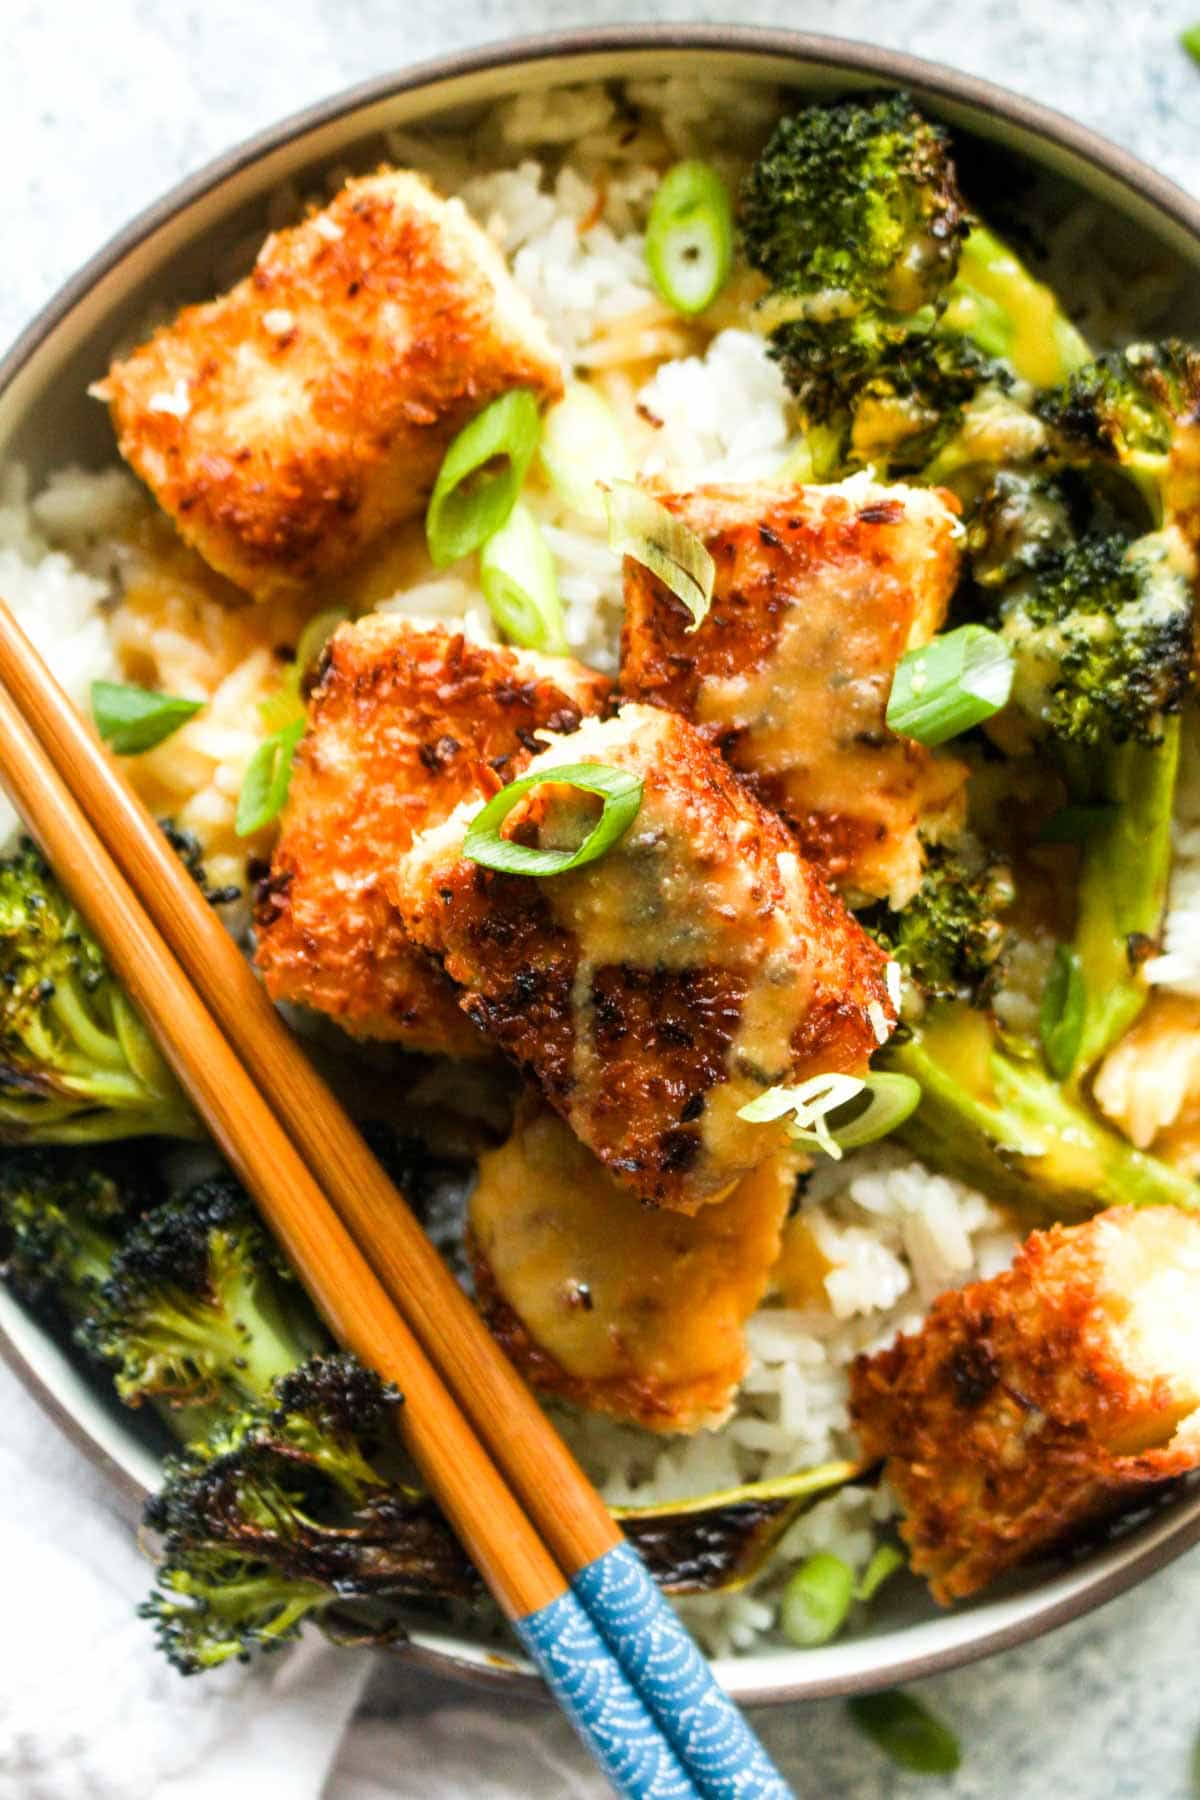 Coconut Crusted Tofu with Habanero Pineapple Sauce and Ginger Coconut Rice is a healthy recipe thats loaded with flavor. The coconut crusted tofu is cooked to golden brown perfection, drizzled with a sweet and spicy sauce, and then served atop fragrant rice. And this dish is vegan and gluten free! | CatchingSeeds.com